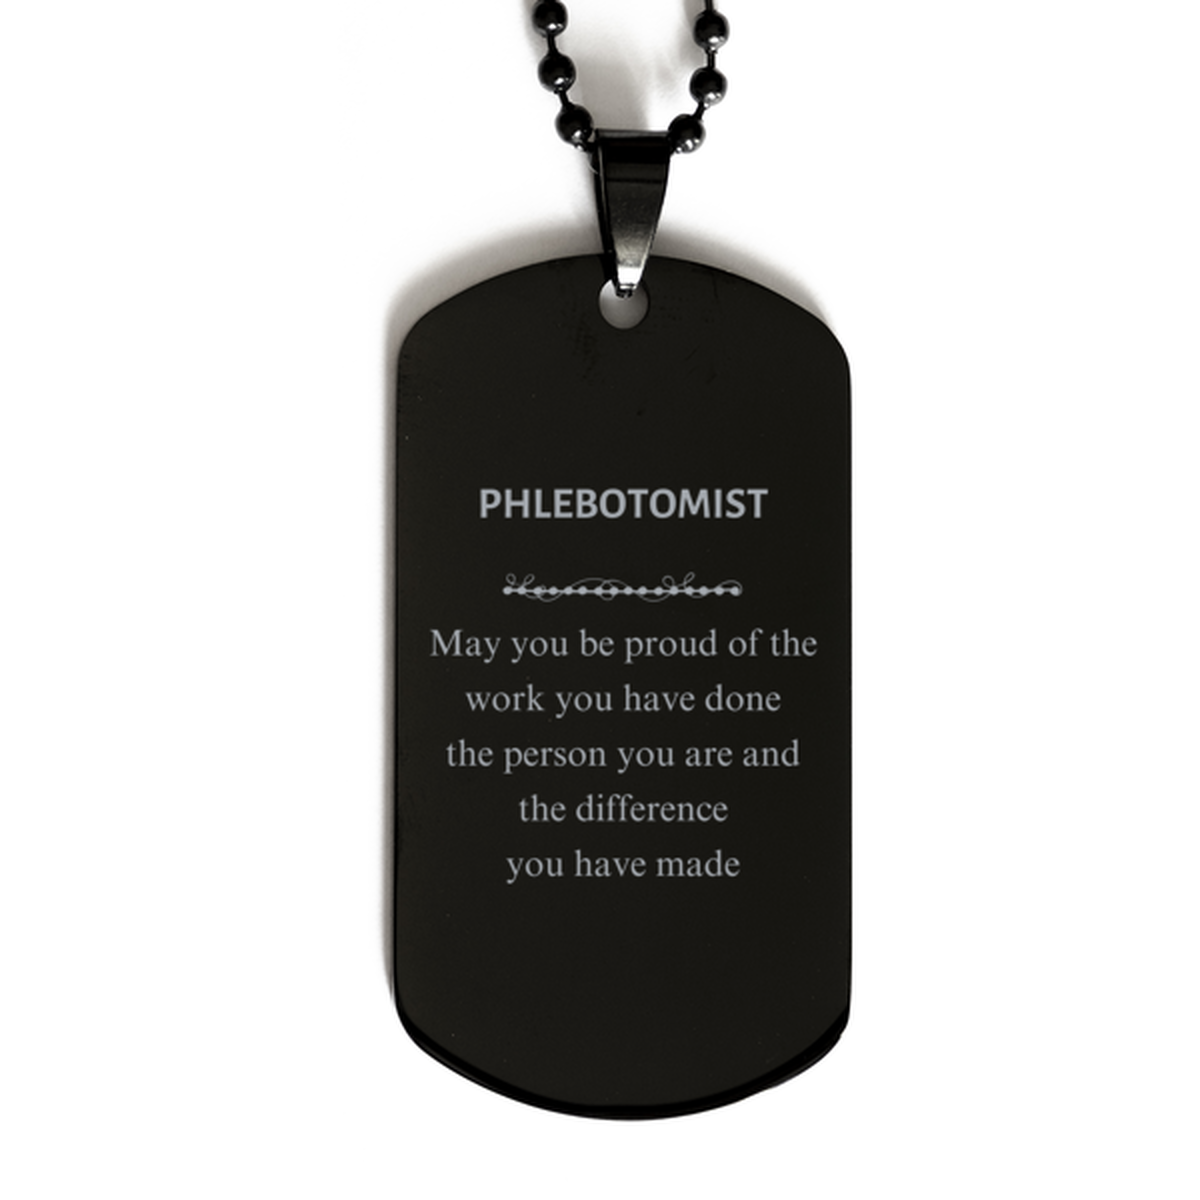 Phlebotomist May you be proud of the work you have done, Retirement Phlebotomist Black Dog Tag for Colleague Appreciation Gifts Amazing for Phlebotomist